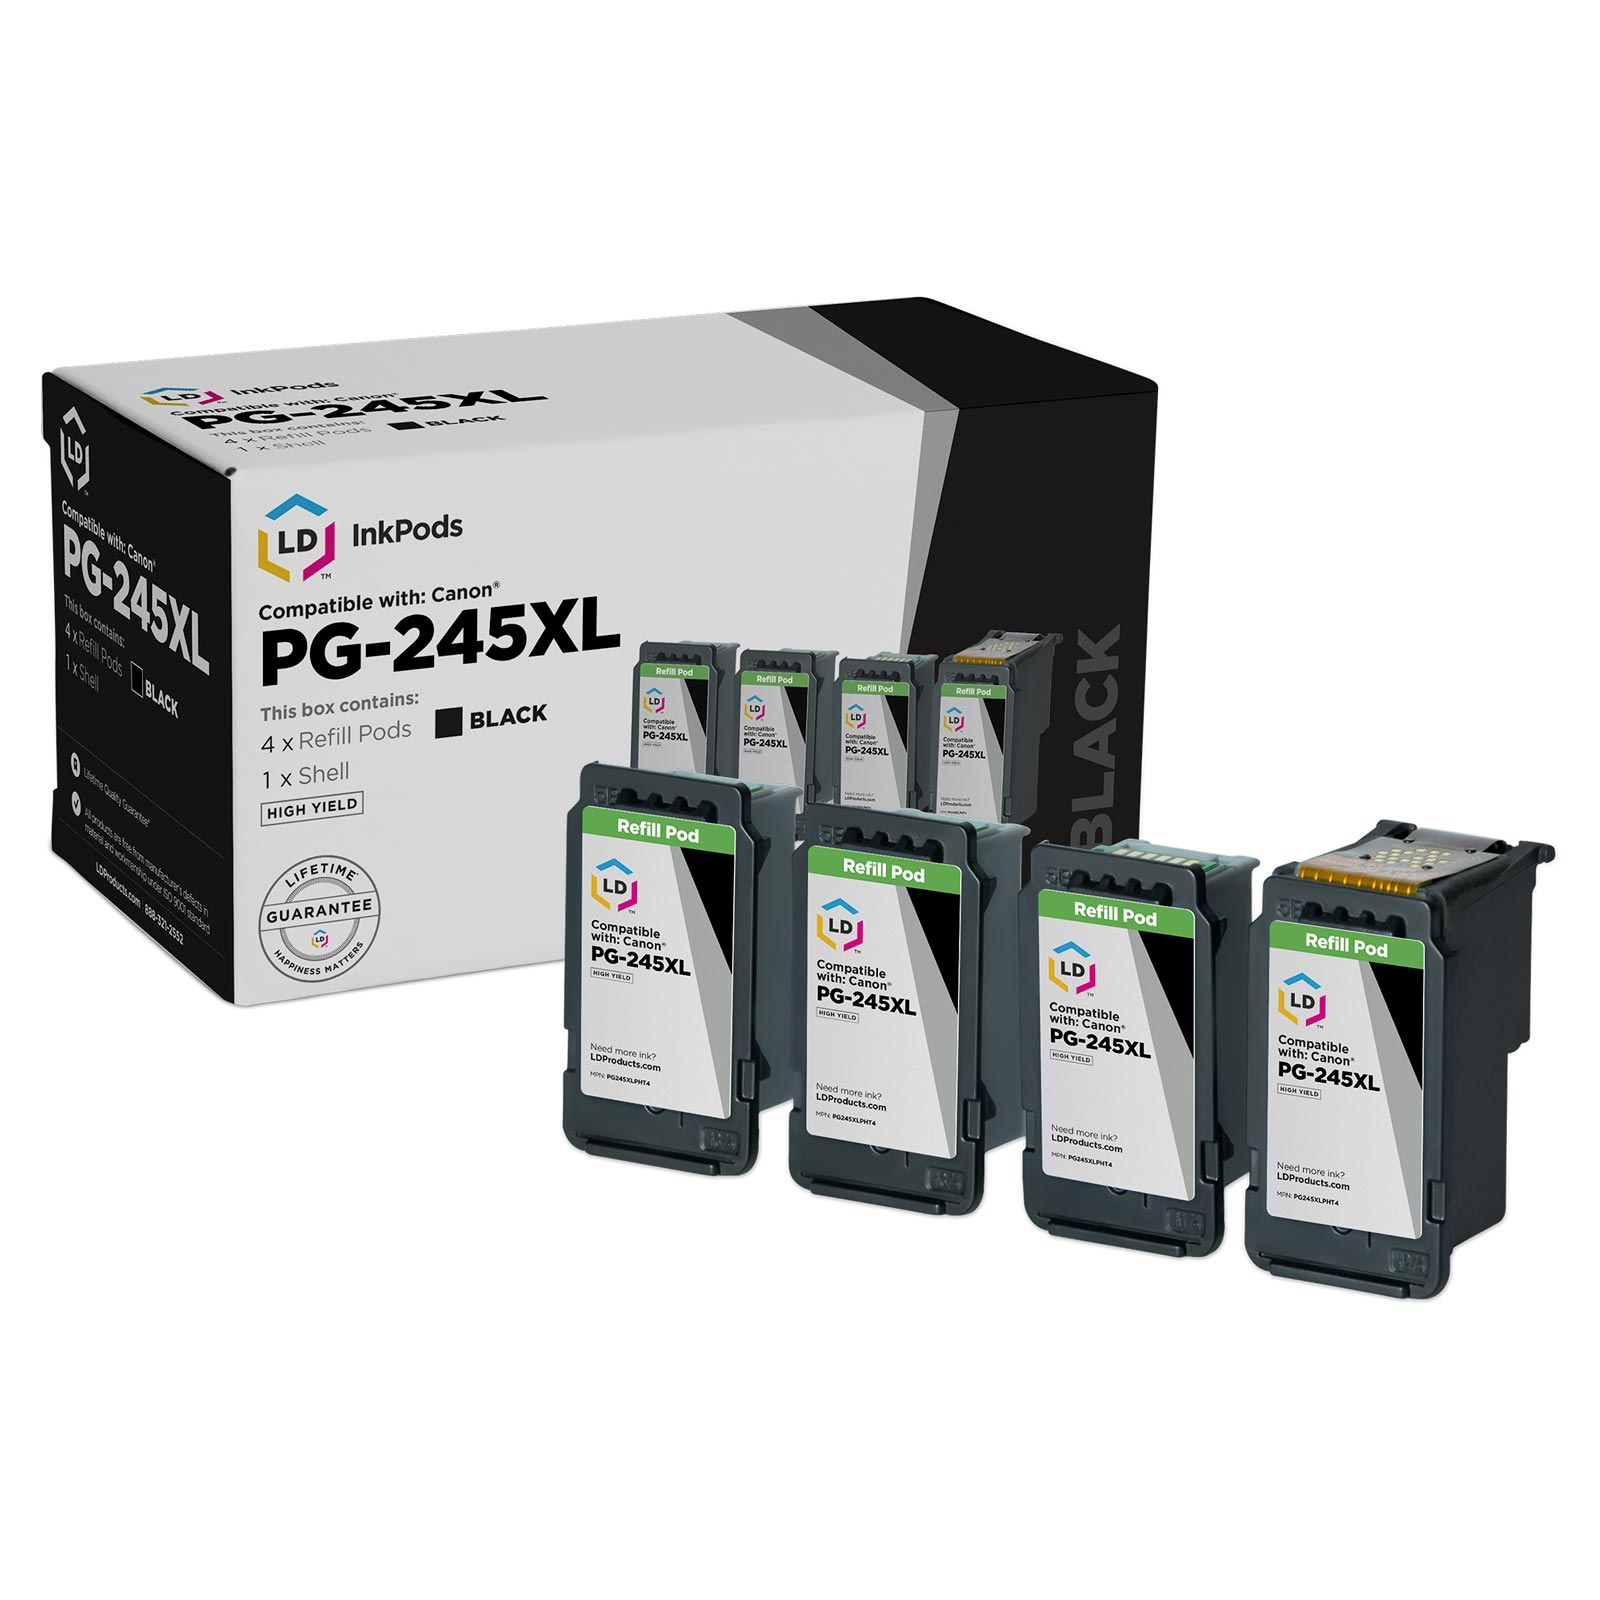 Canon PG-245XL ink